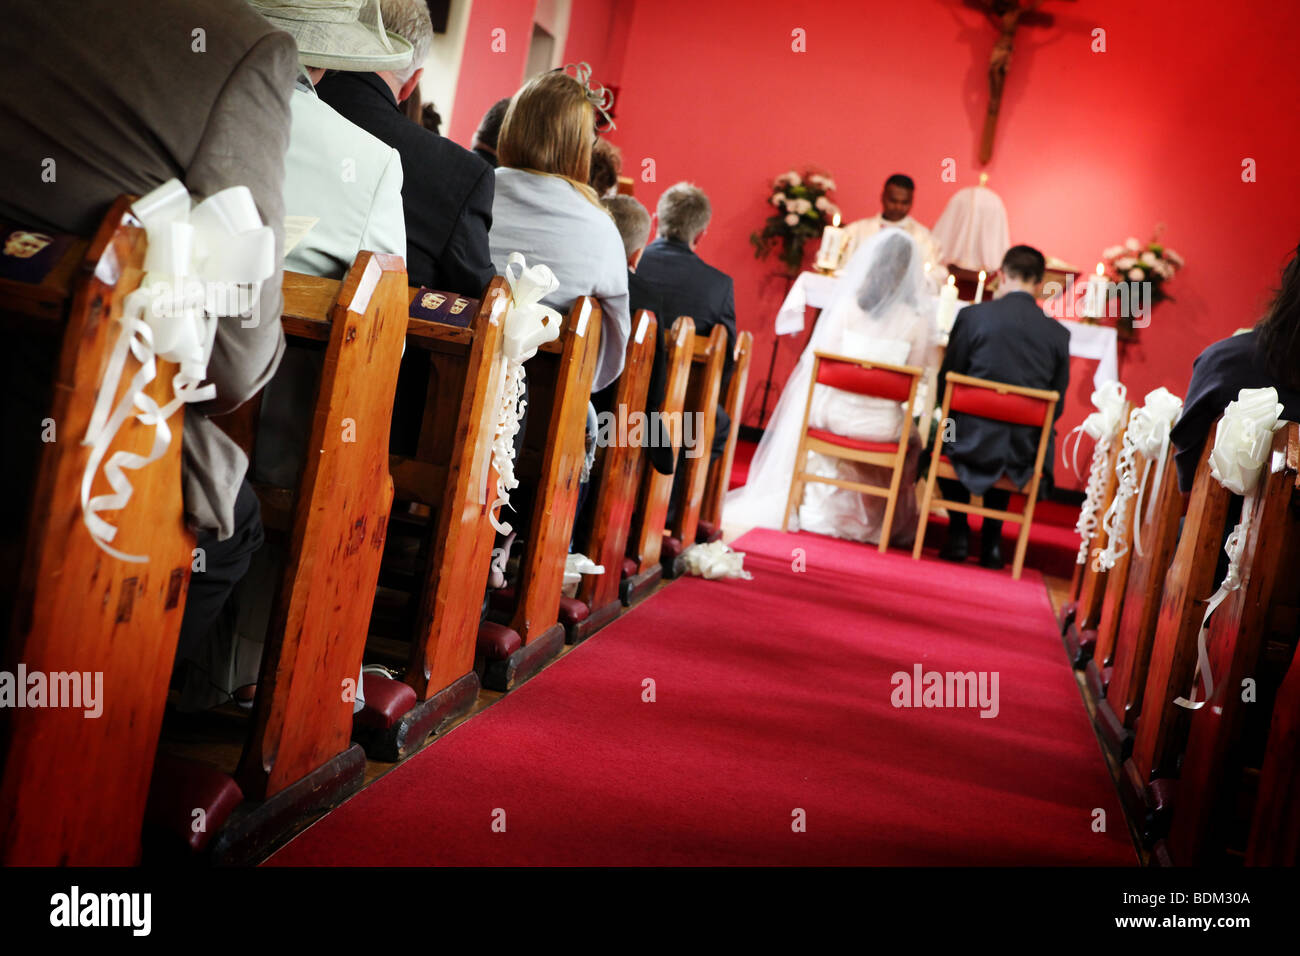 Church isle with red carpet and bride and groom sitting down in wedding ceremony at altar reportage style wedding photo image UK Stock Photo